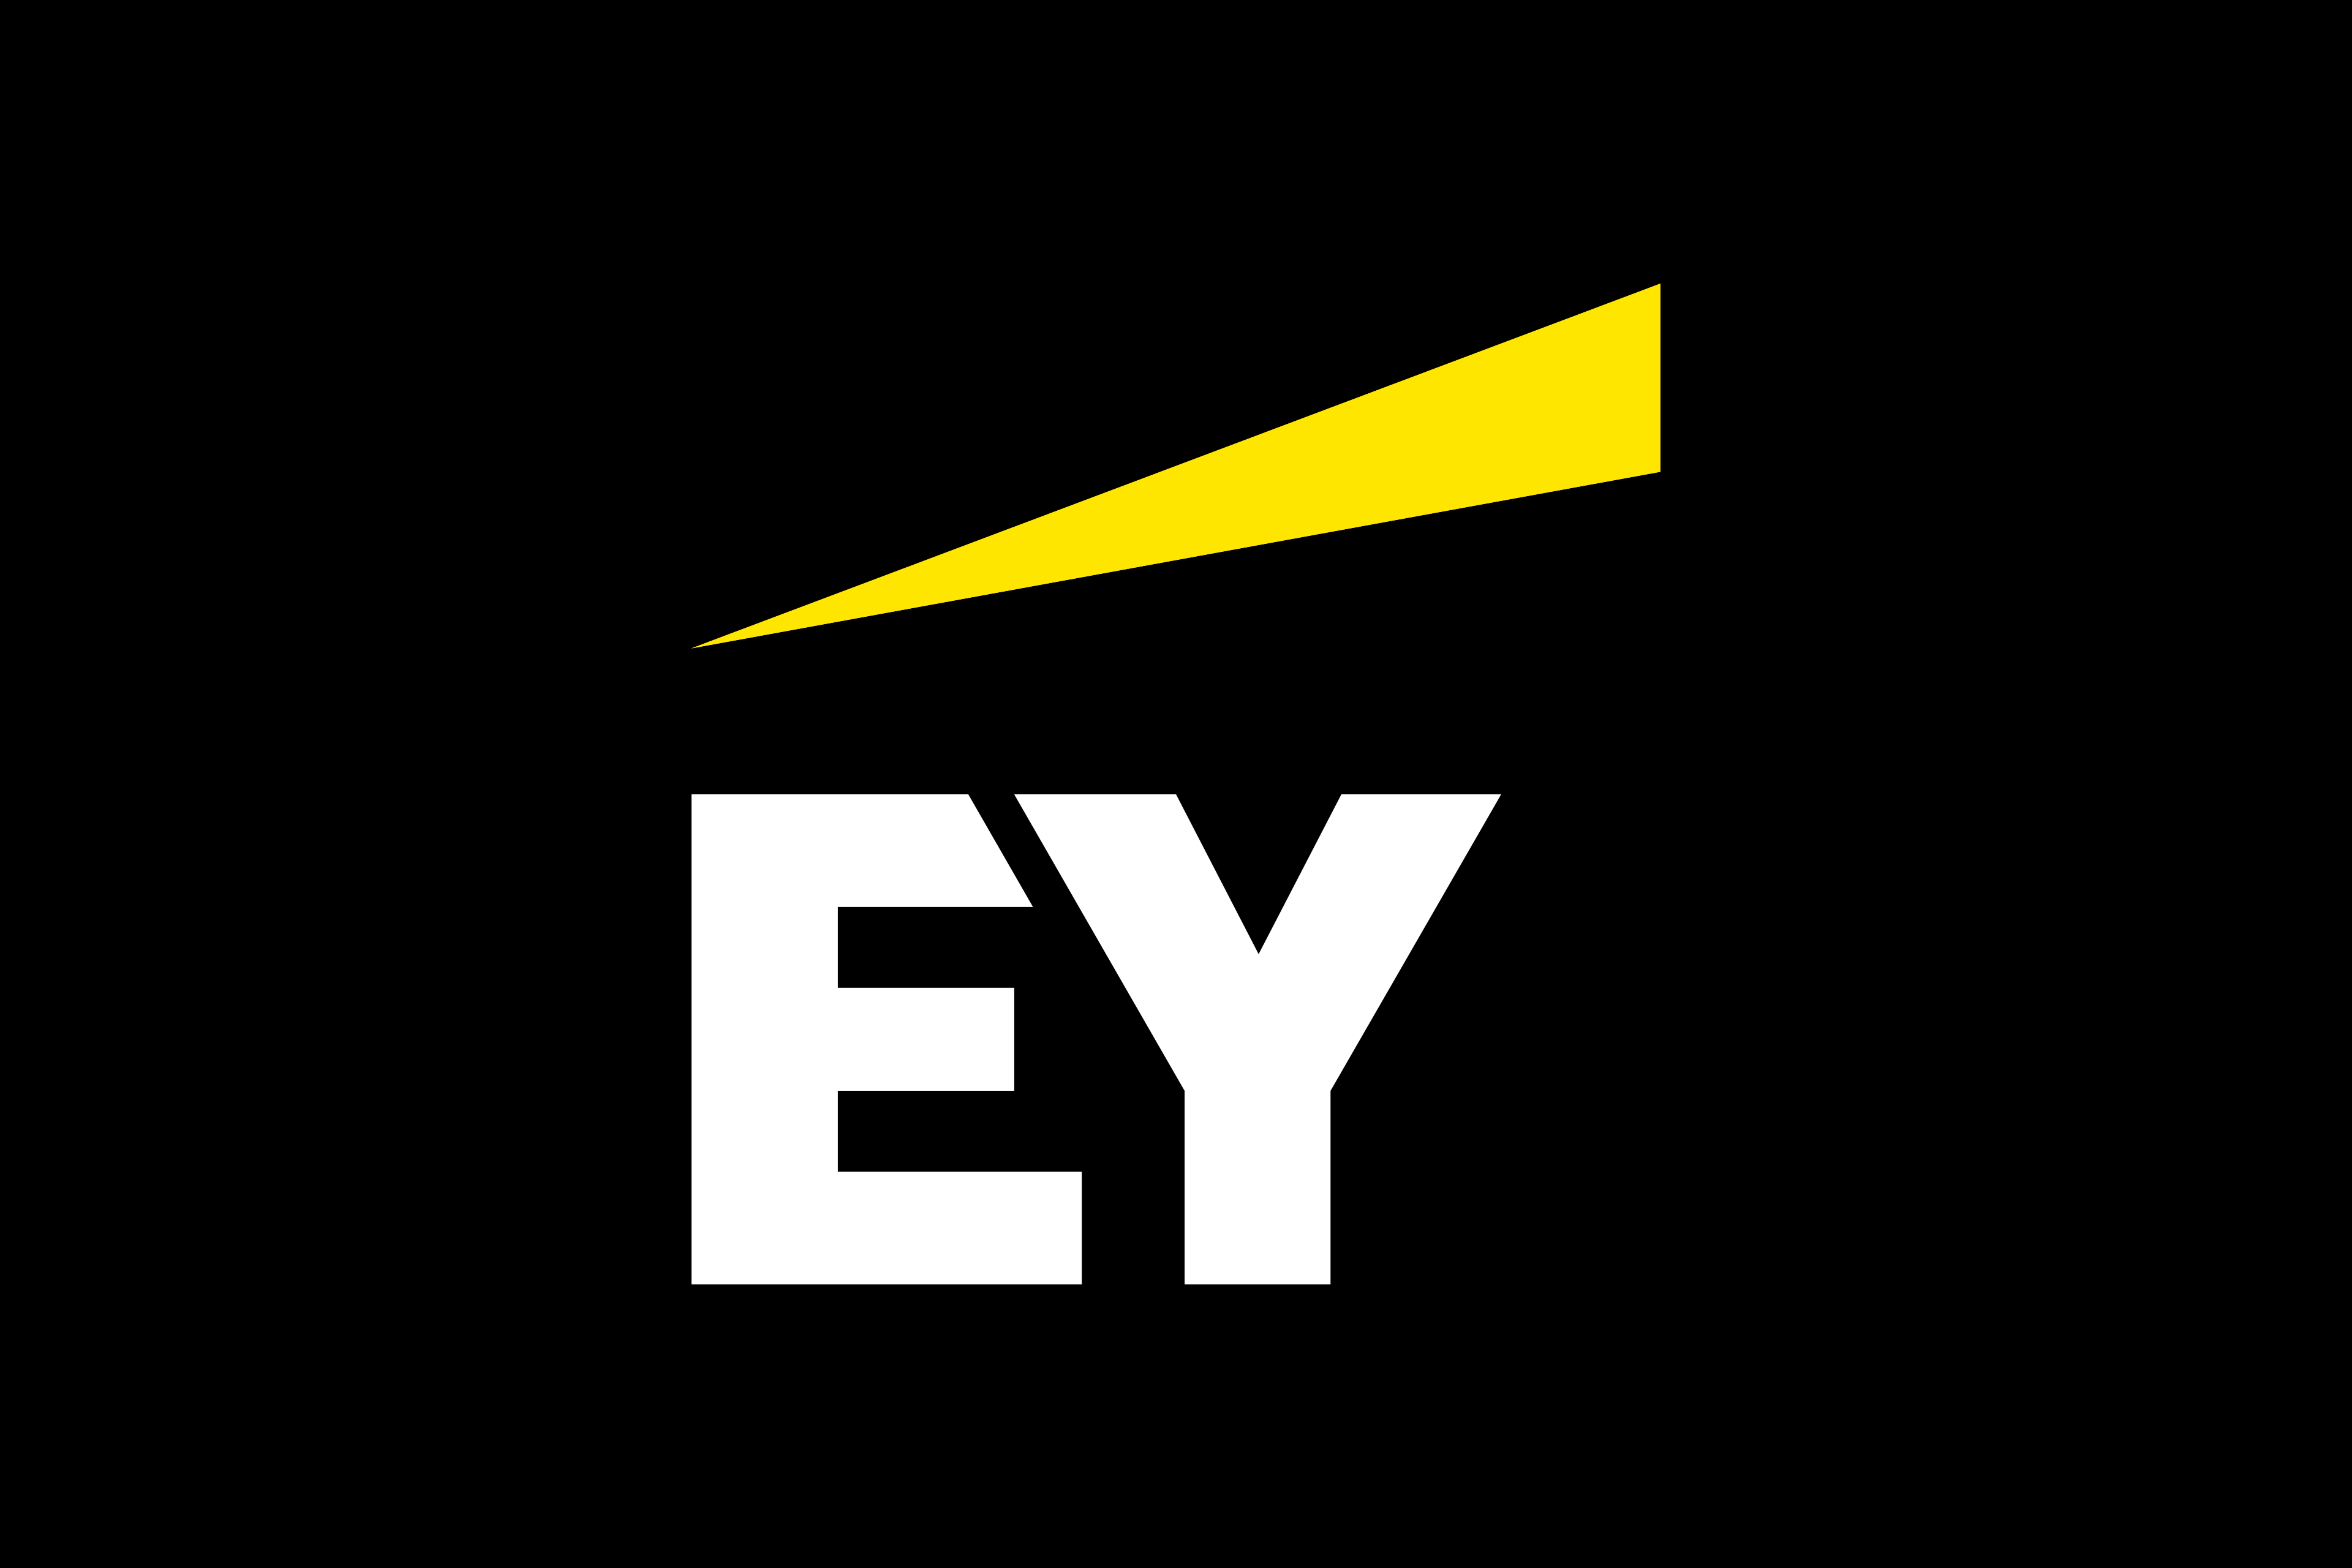 EY Announces Jamie Miller as EY Global CFO, and CFO of Proposed Public Company